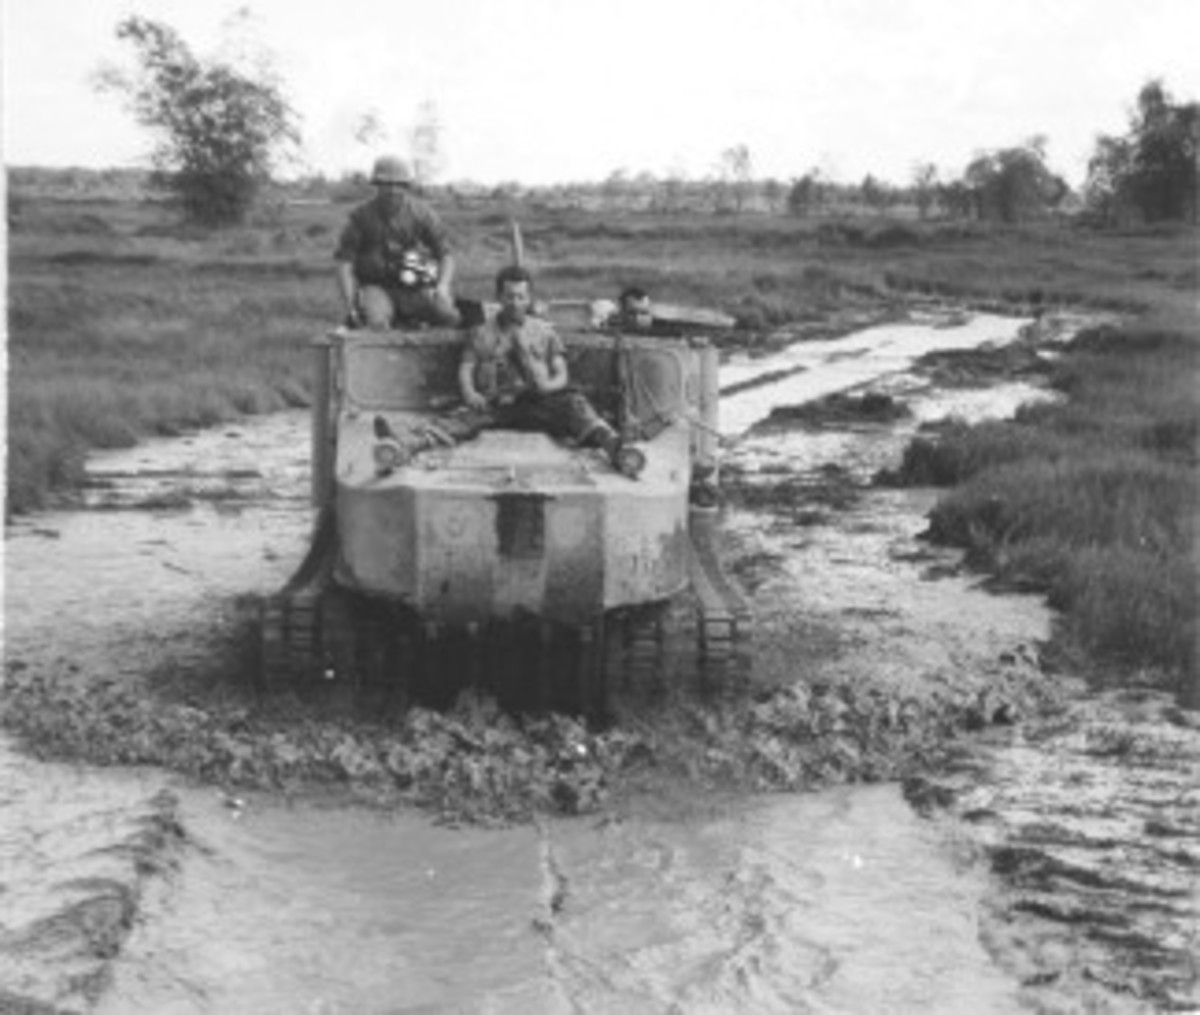 The Pontiac-built M76 Otter was envisioned as a replacement for the famed Studebaker Weasel. The aluminum-bodied vehicle was driven in the water by a propeller. Not well-received by the Army, the vehicles were none-the-less used by Marines in Vietnam, where this photo was taken near Da Nang in 1968.